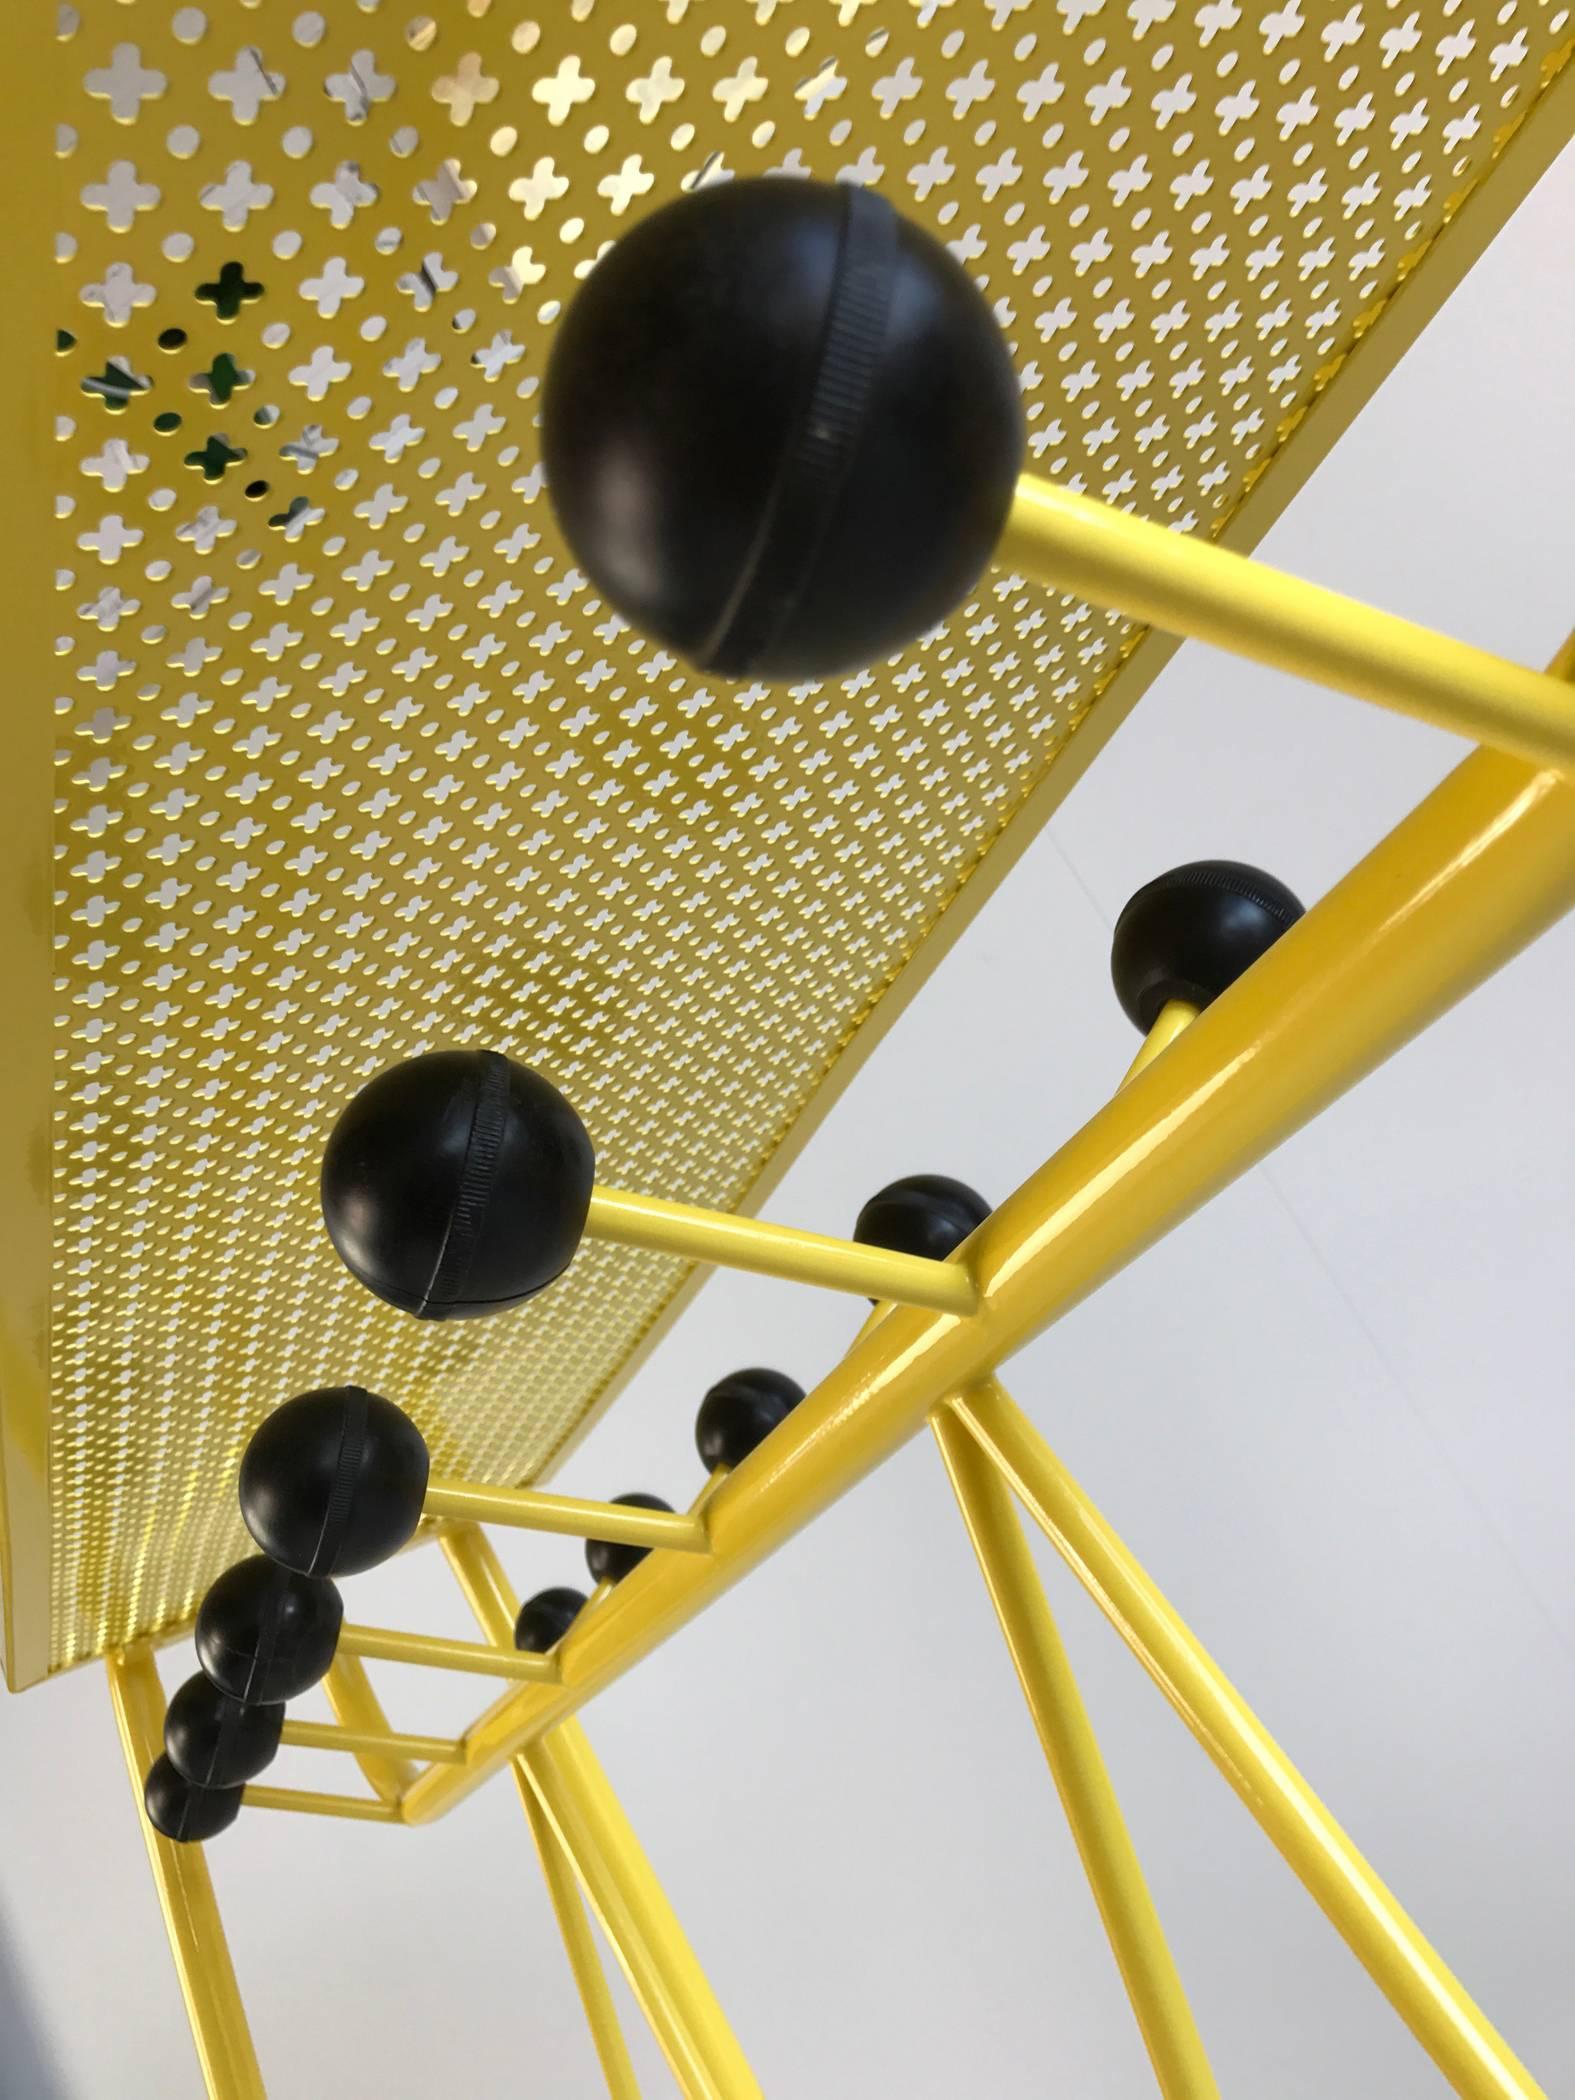 Double coat rack in tubular metal lacquered yellow with twelve hooks in bakelite, France, 1950. Top plate is perforated metal.
Very nice state, relaqué epoxy yellow.